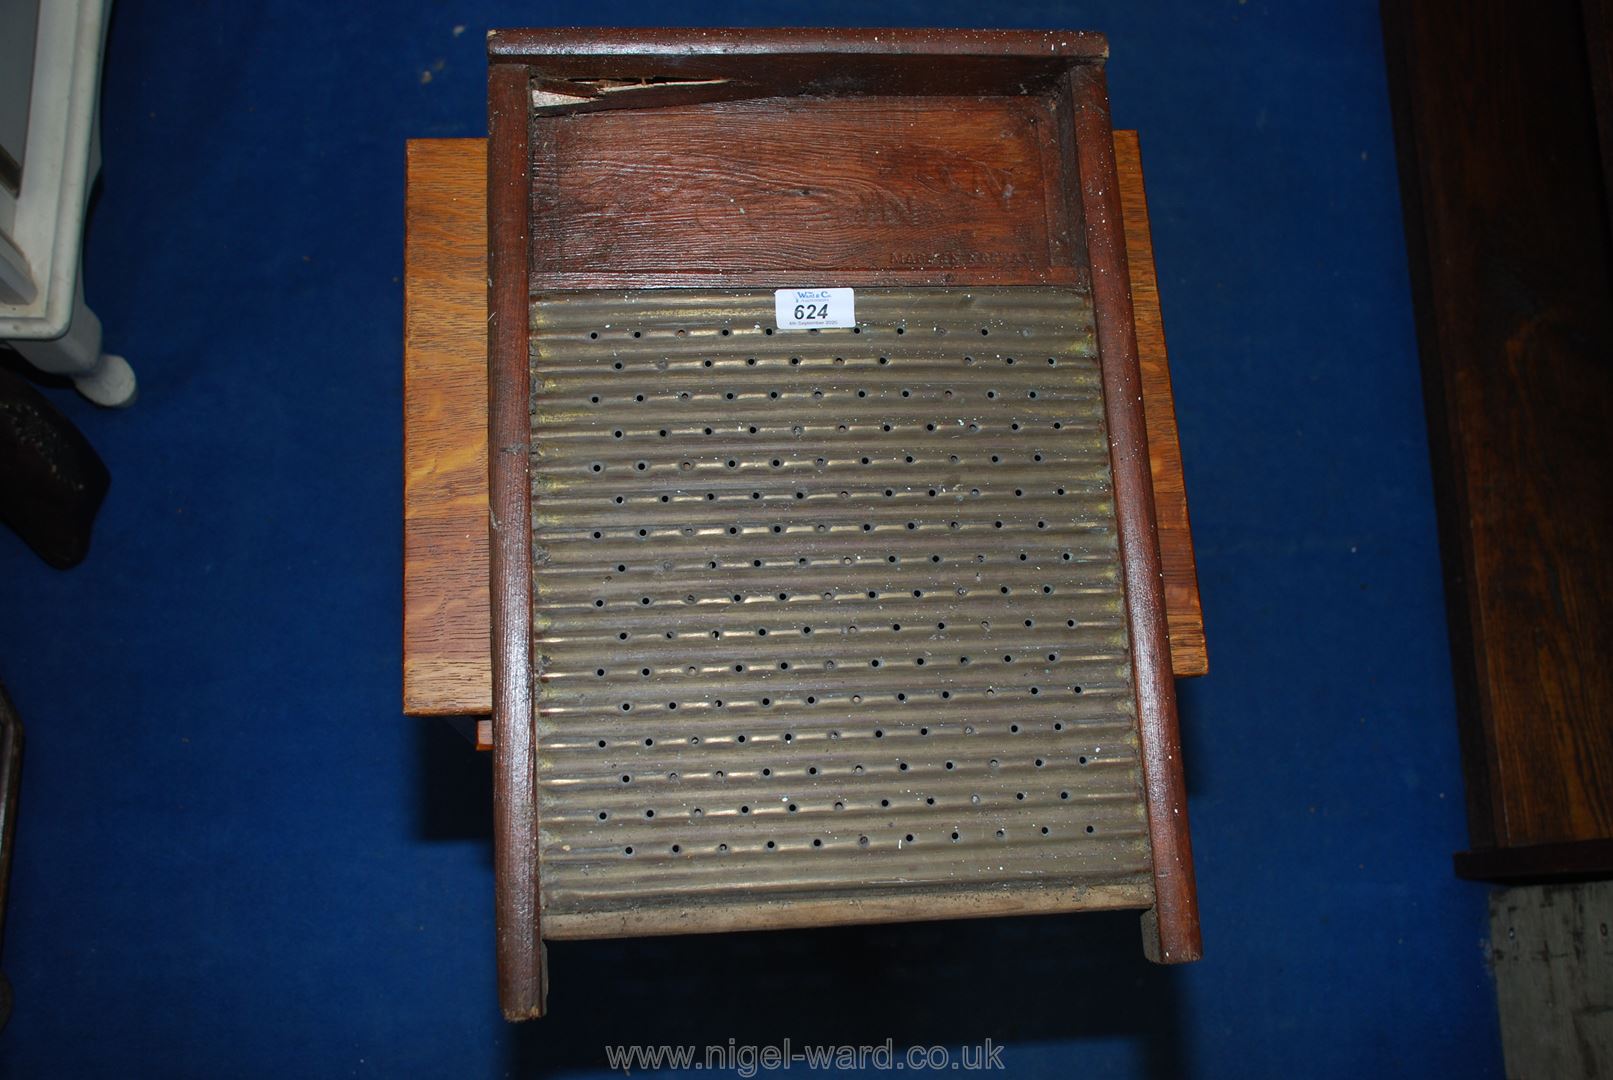 Northern Queen washboard made in Norway.